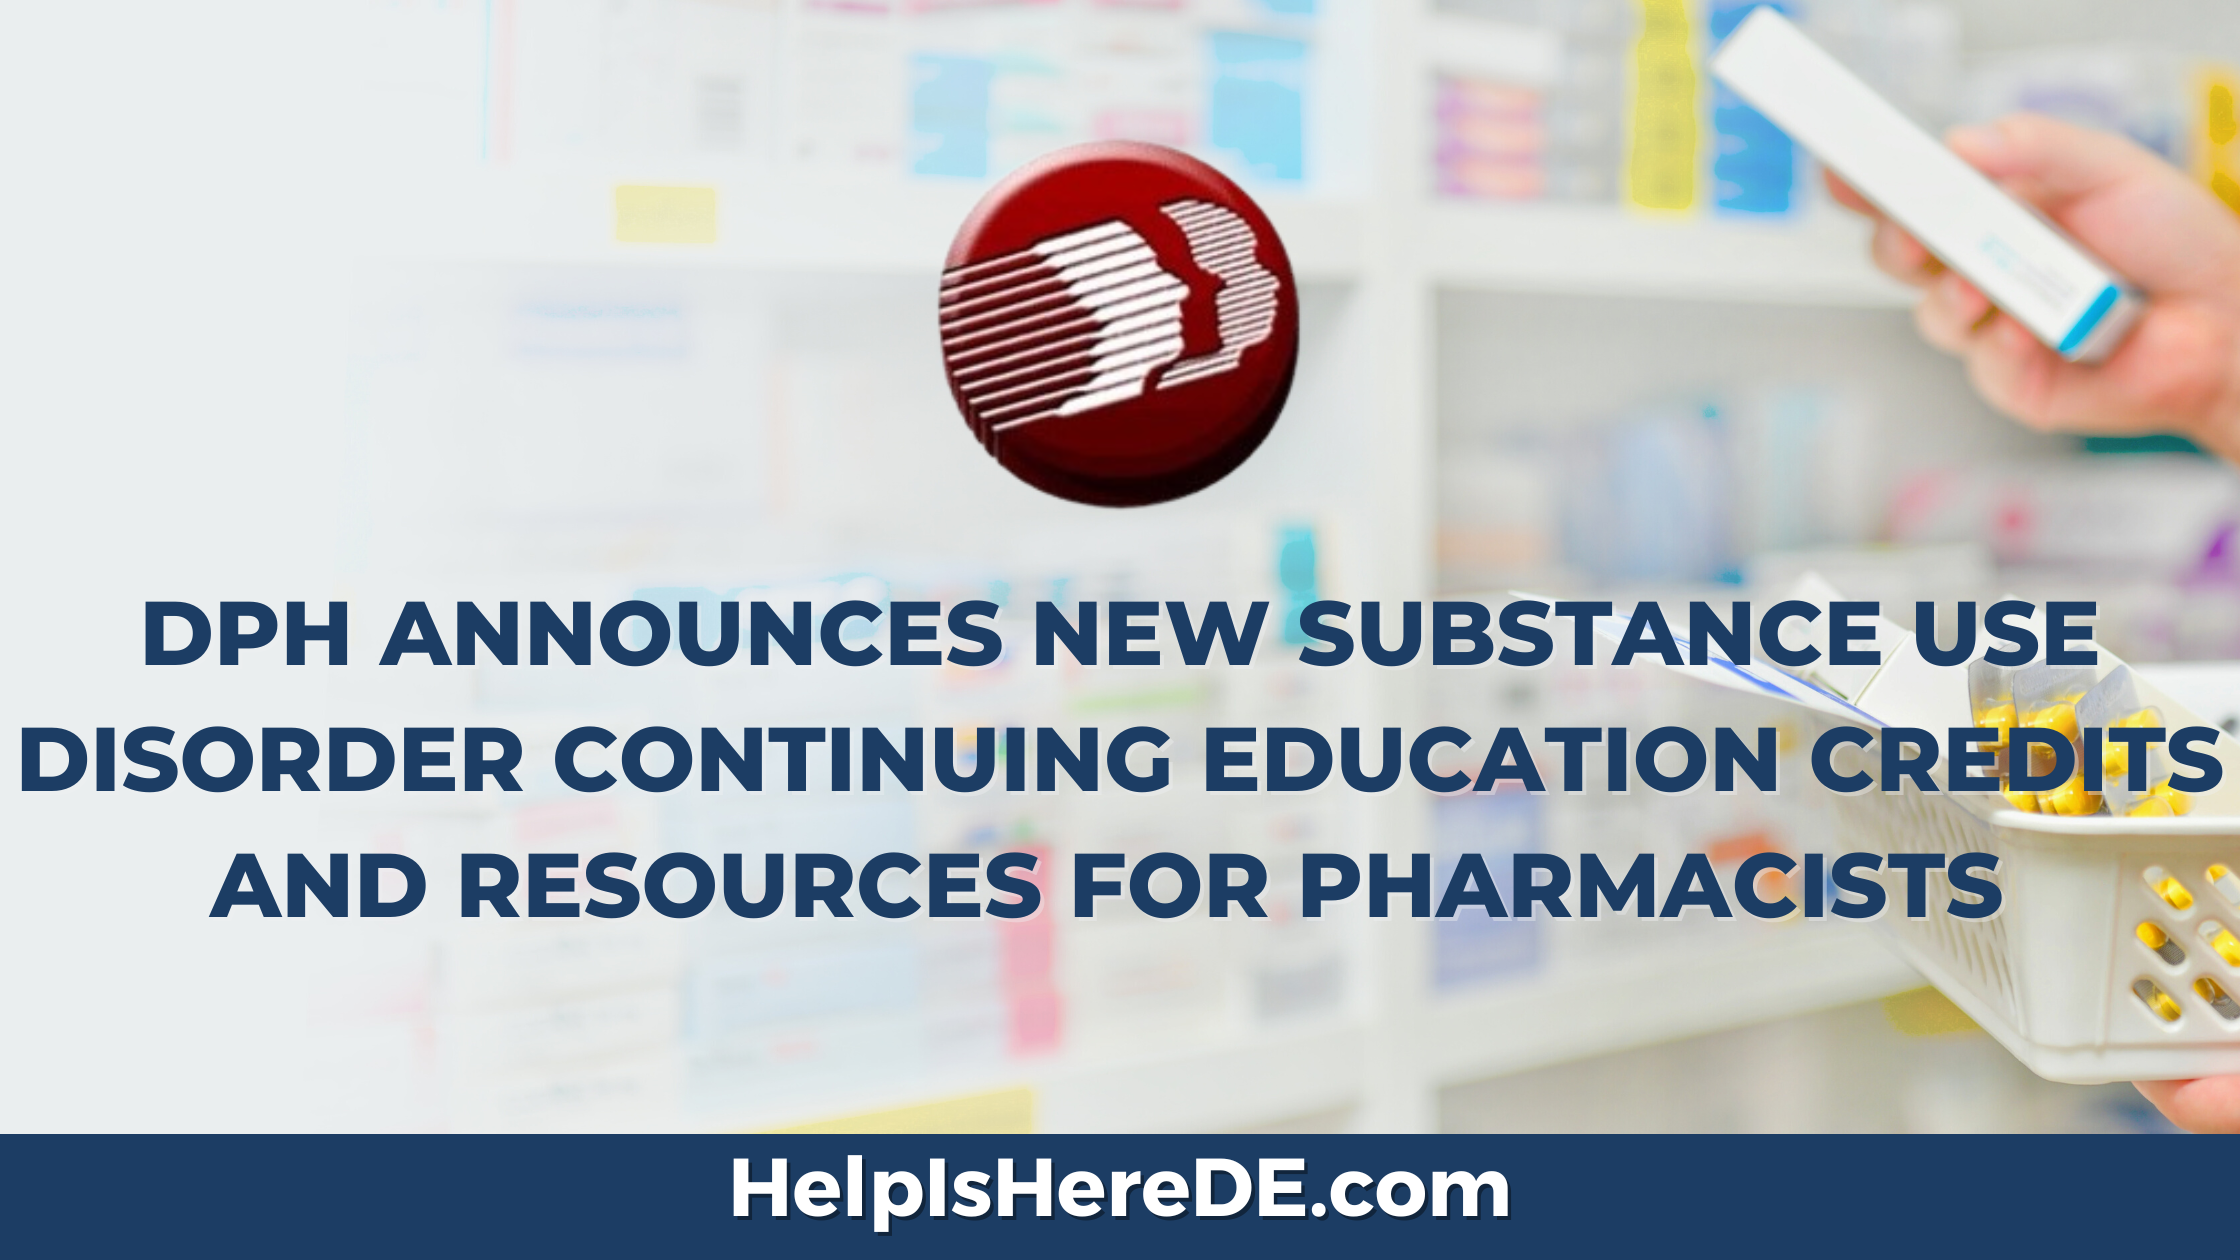 DPH ANNOUNCES NEW SUBSTANCE USE DISORDER CONTINUING EDUCATION CREDITS AND RESOURCES FOR PHARMACISTS